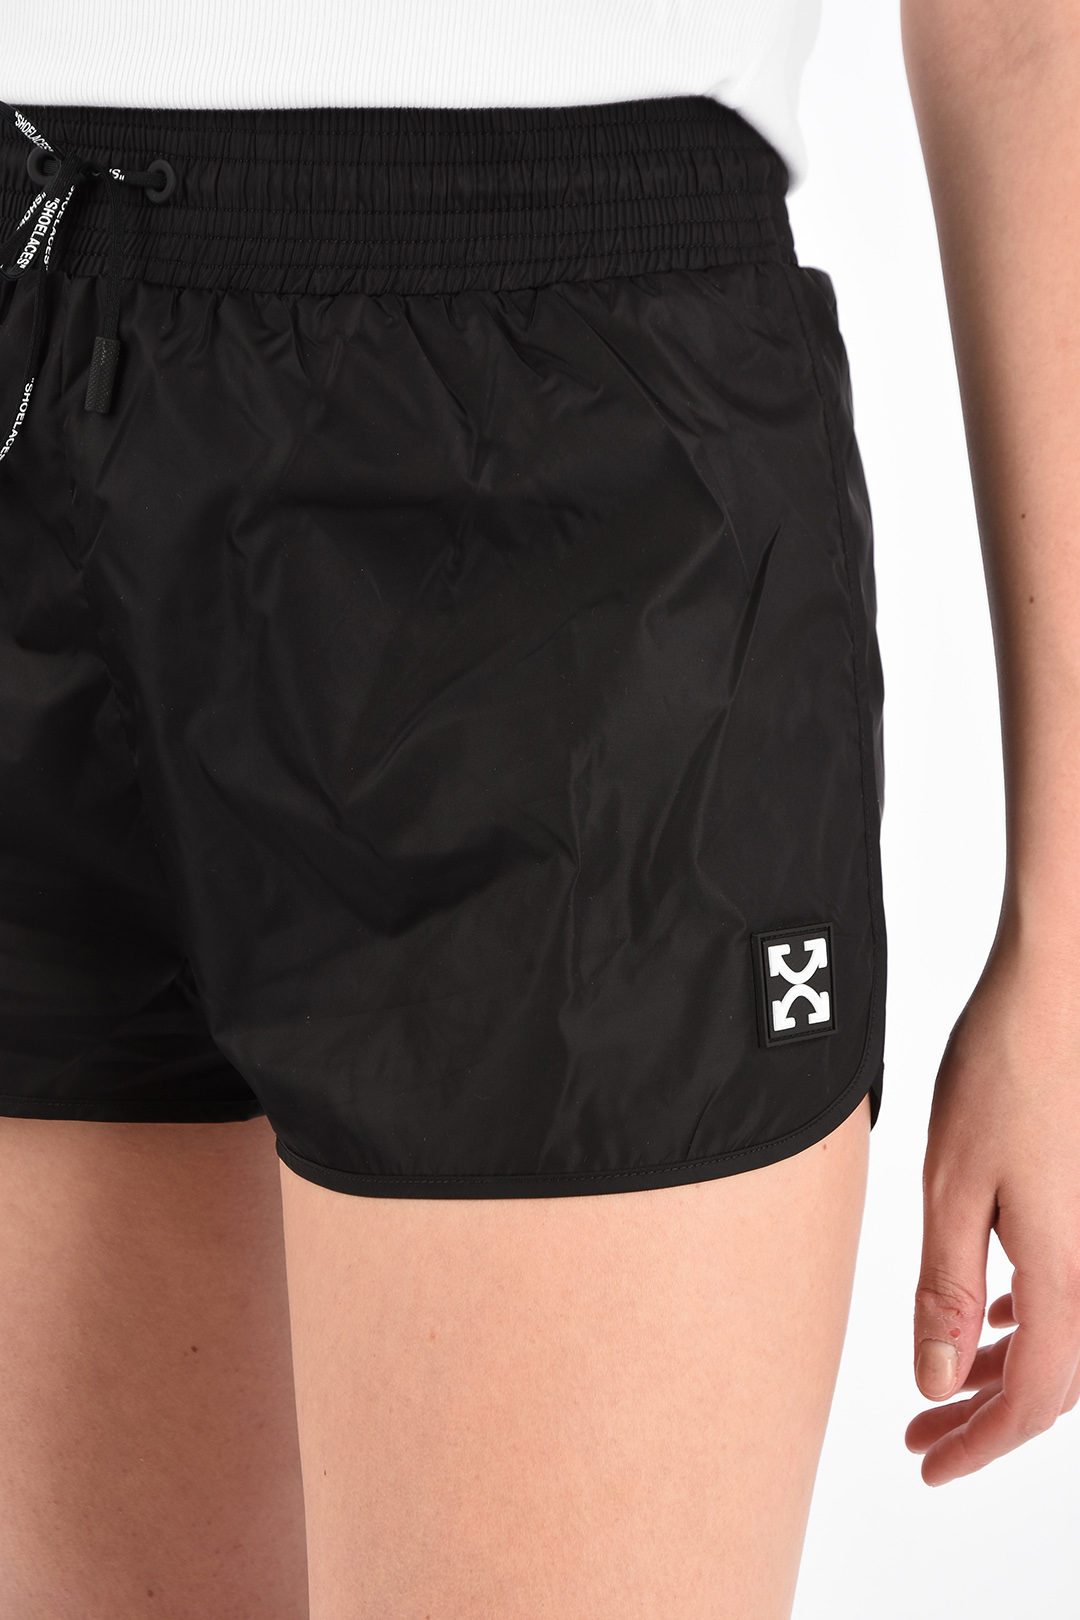 Off-White active shorts woman S/M